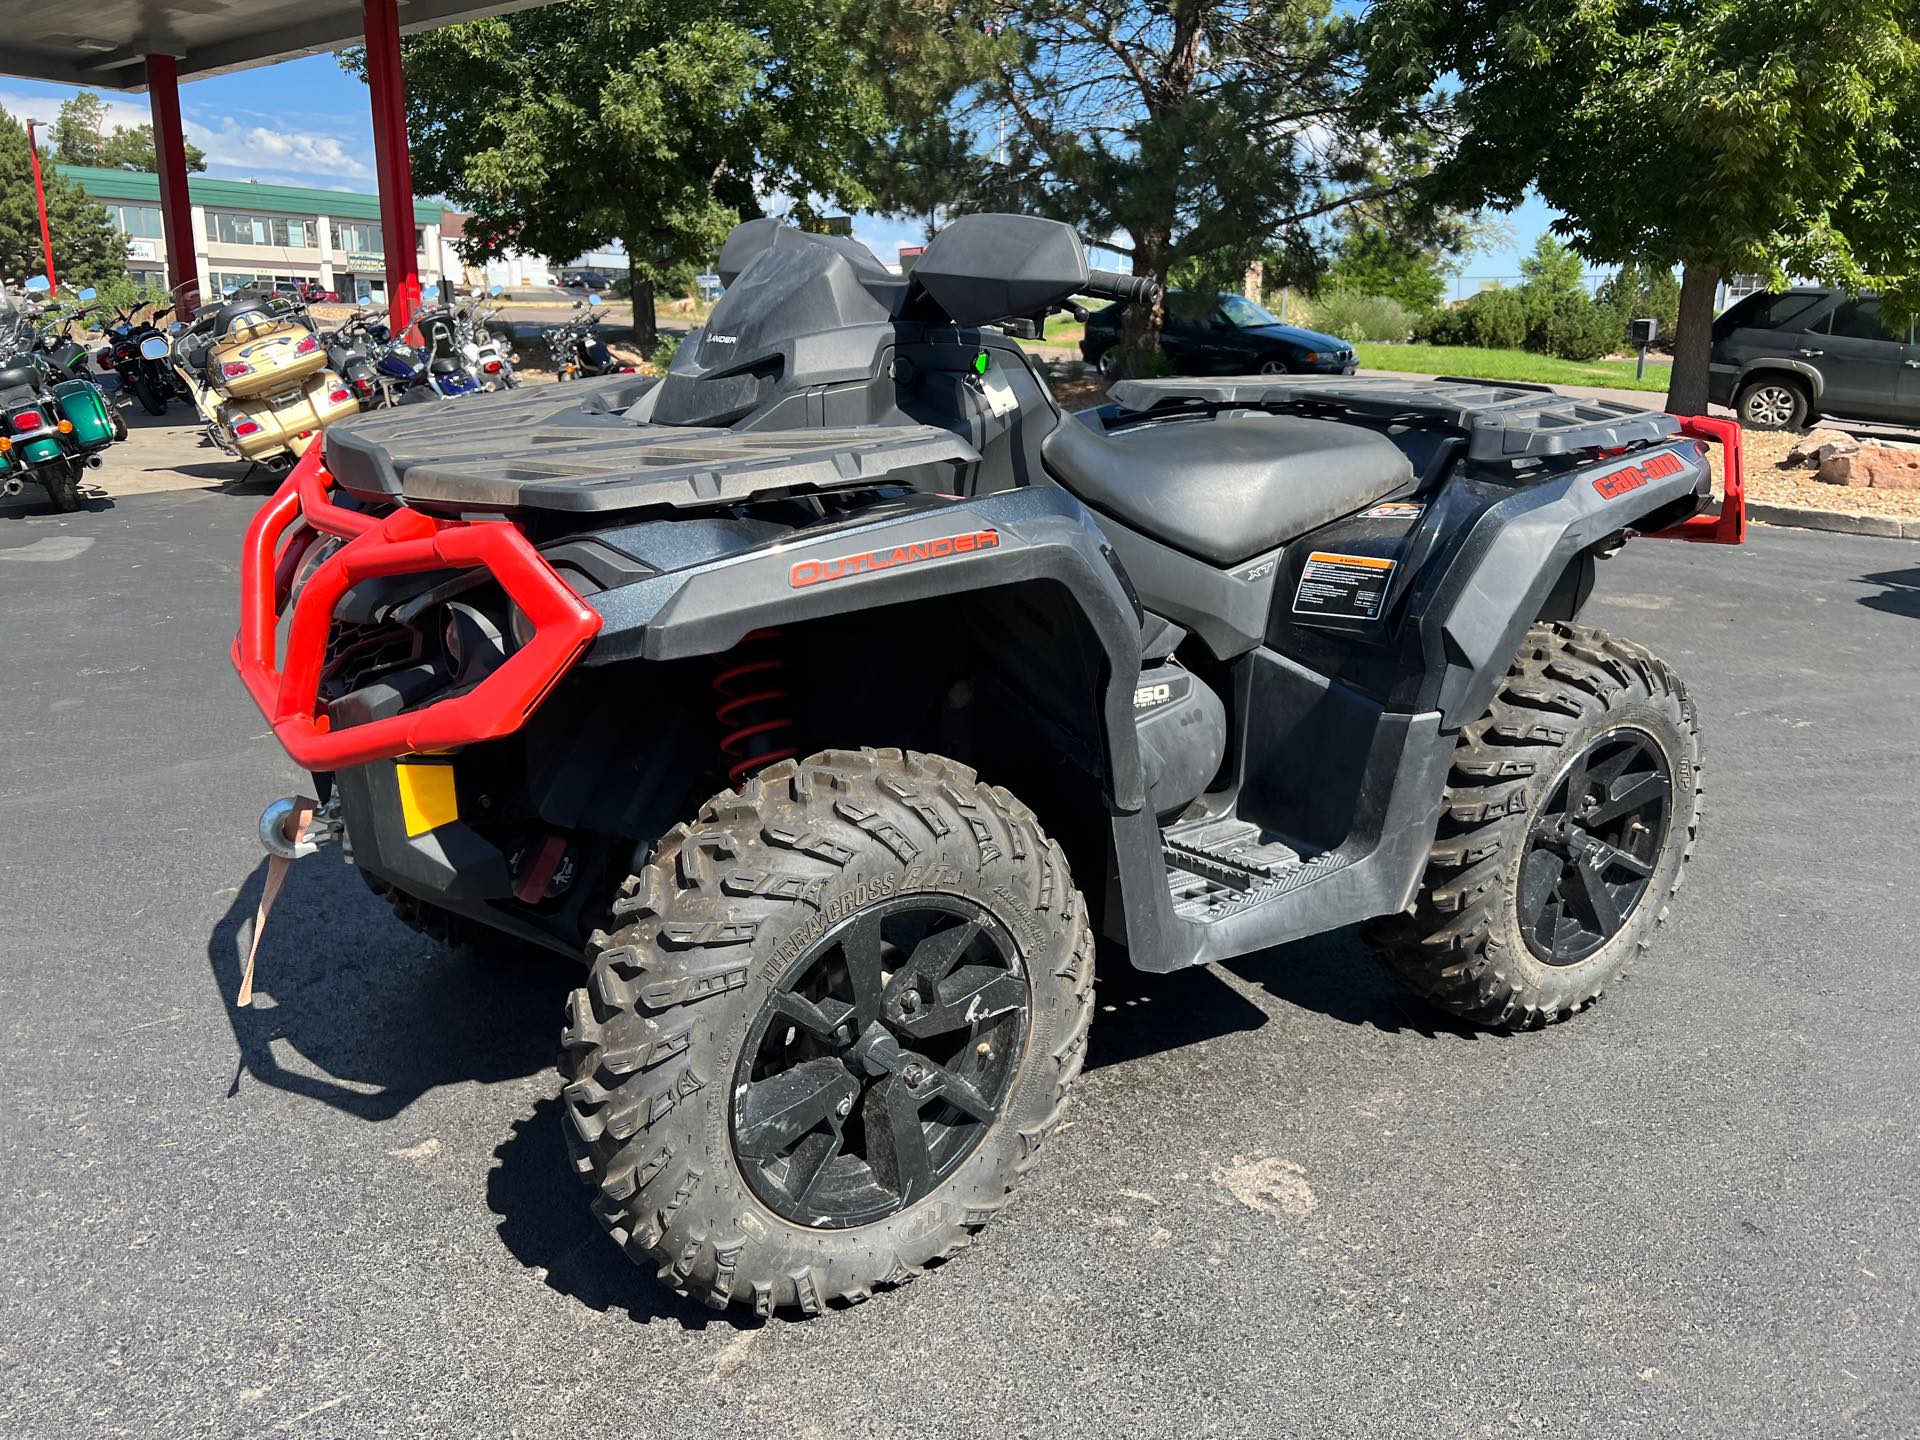 2019 Can-Am Outlander XT 650 at Aces Motorcycles - Fort Collins